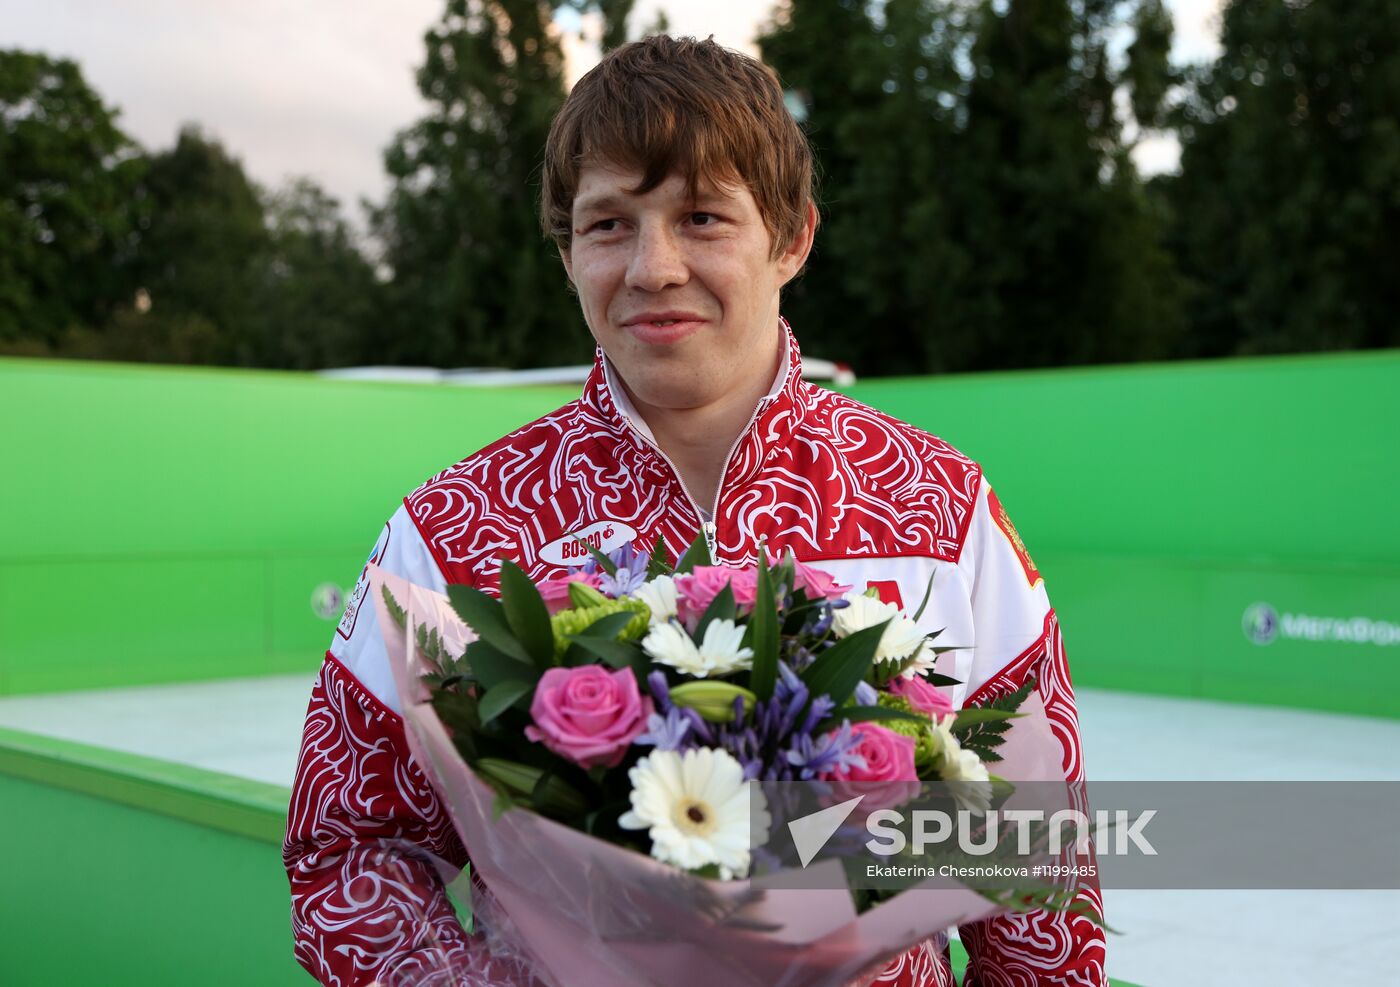 Honoring Olympic medalists in Russia Park